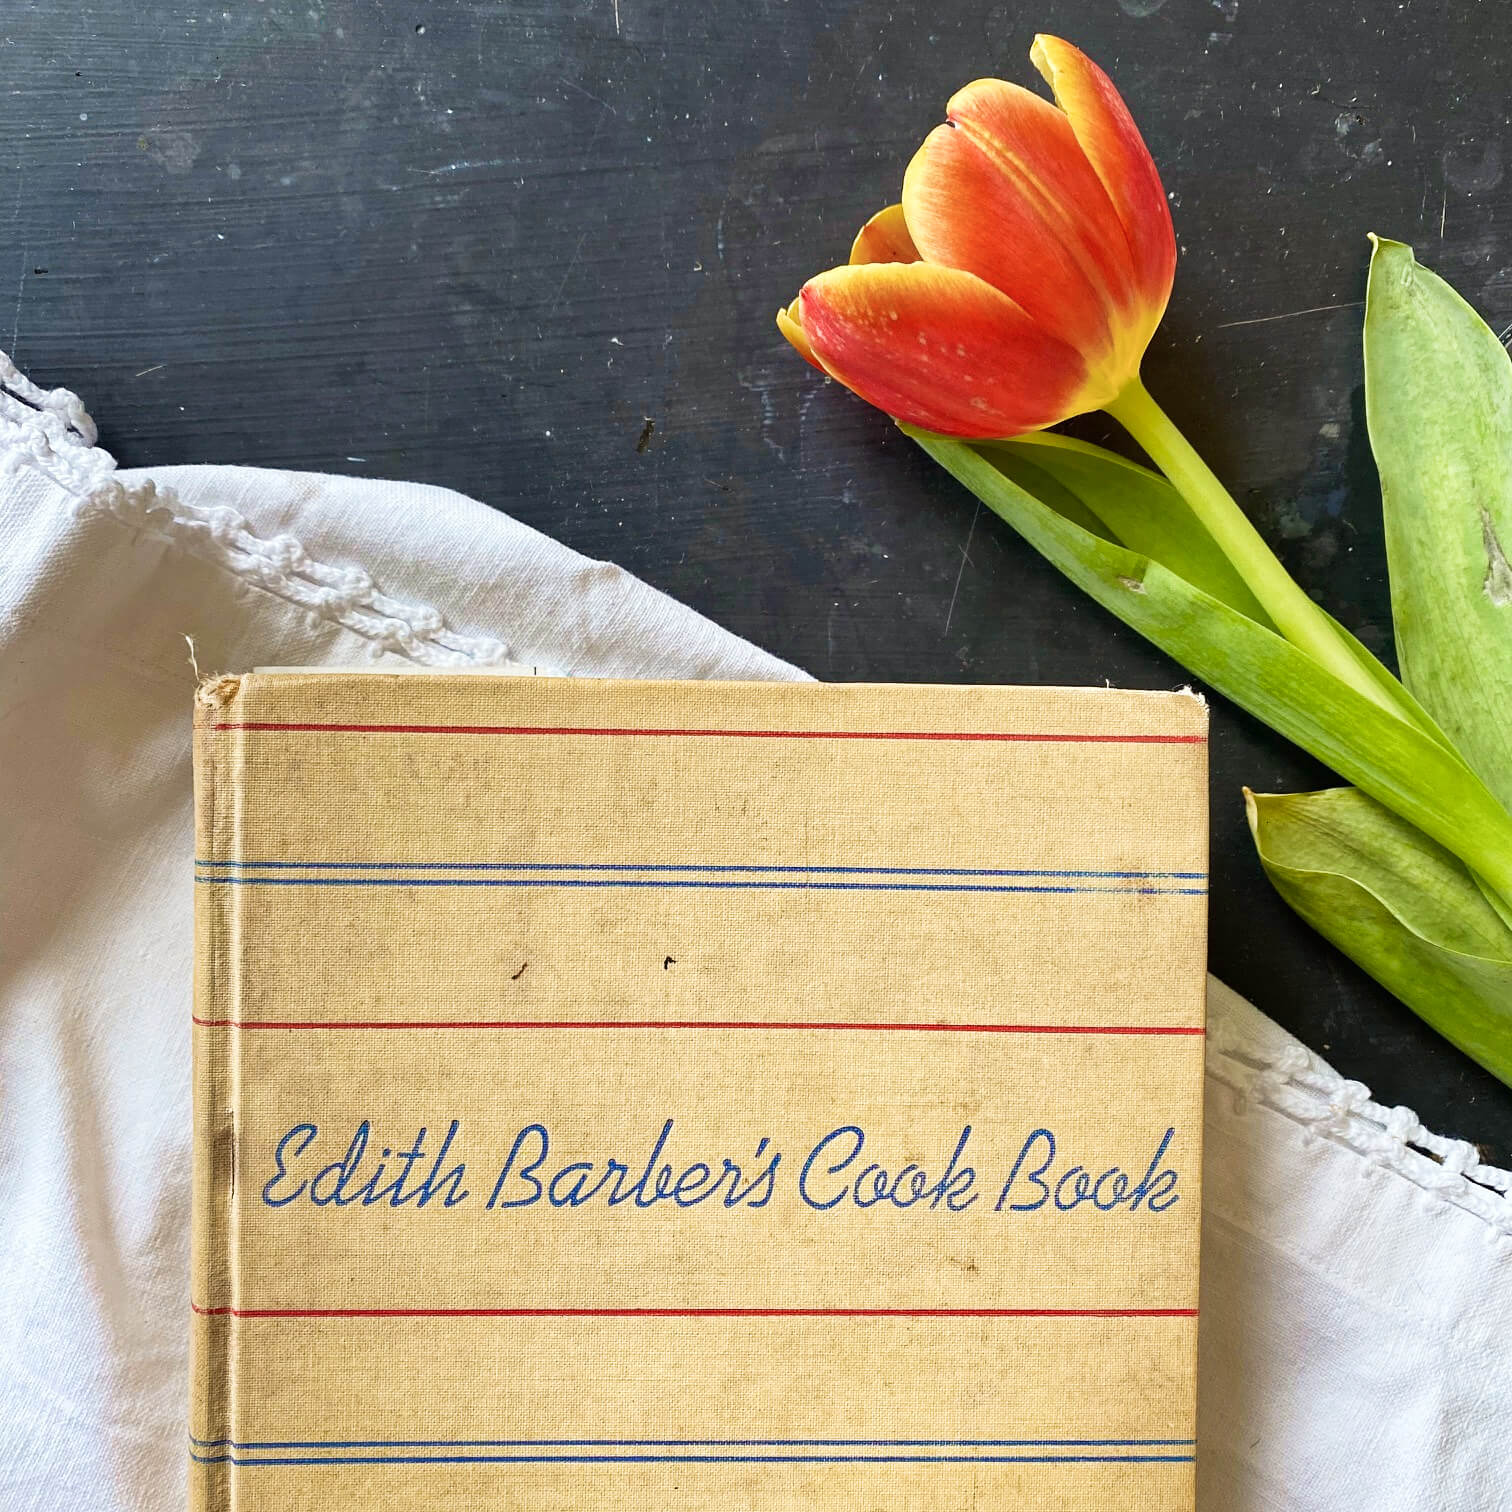 Edith Barber's Cook Book - 1940 - First Edition - Food Columnist for the New York Sun